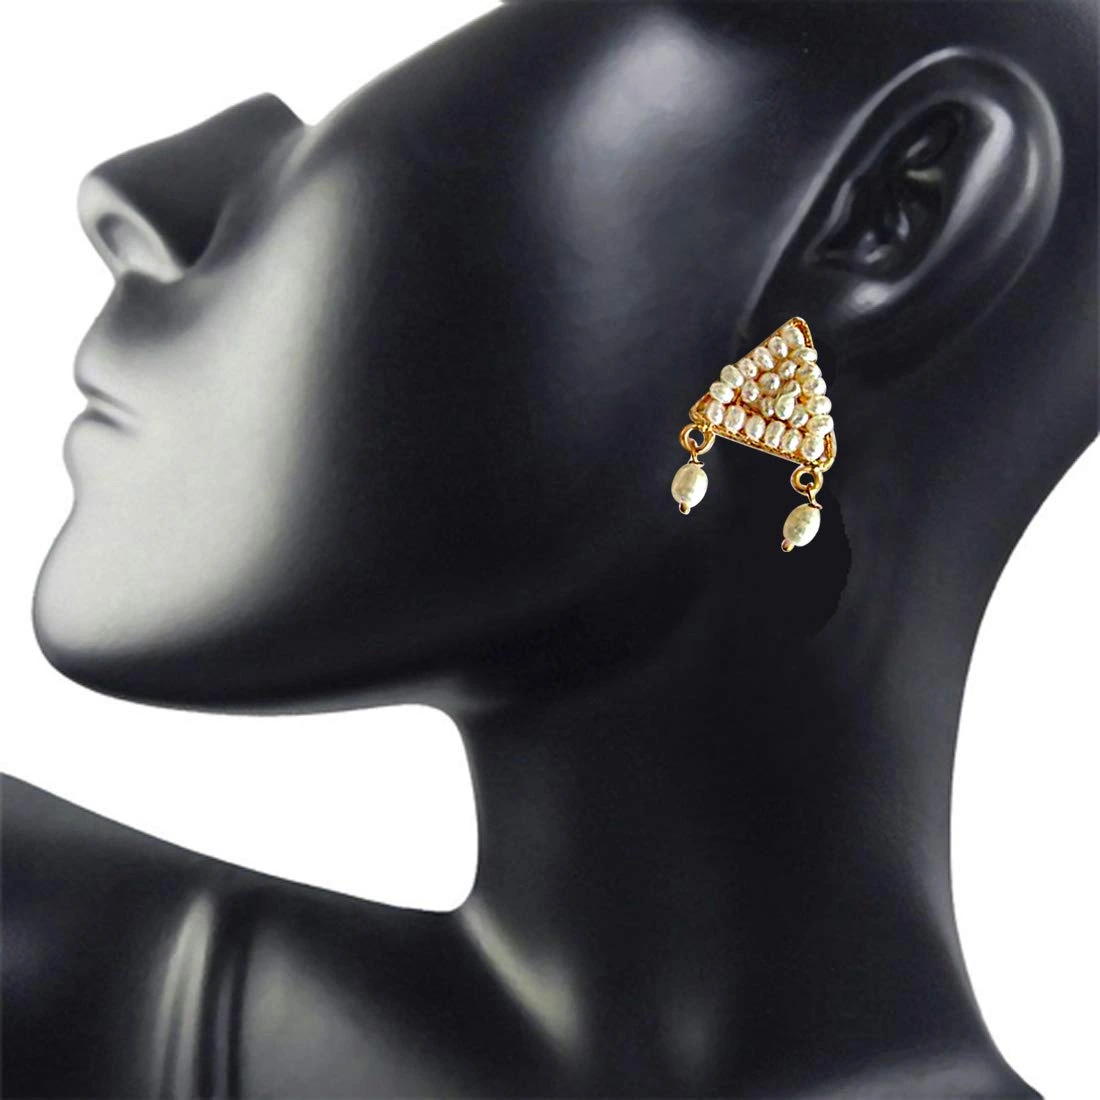 Perfect Pearl Beauty - Real Freshwater Pearl & Gold Plated Triangular Shaped Earring for Women (SE47)